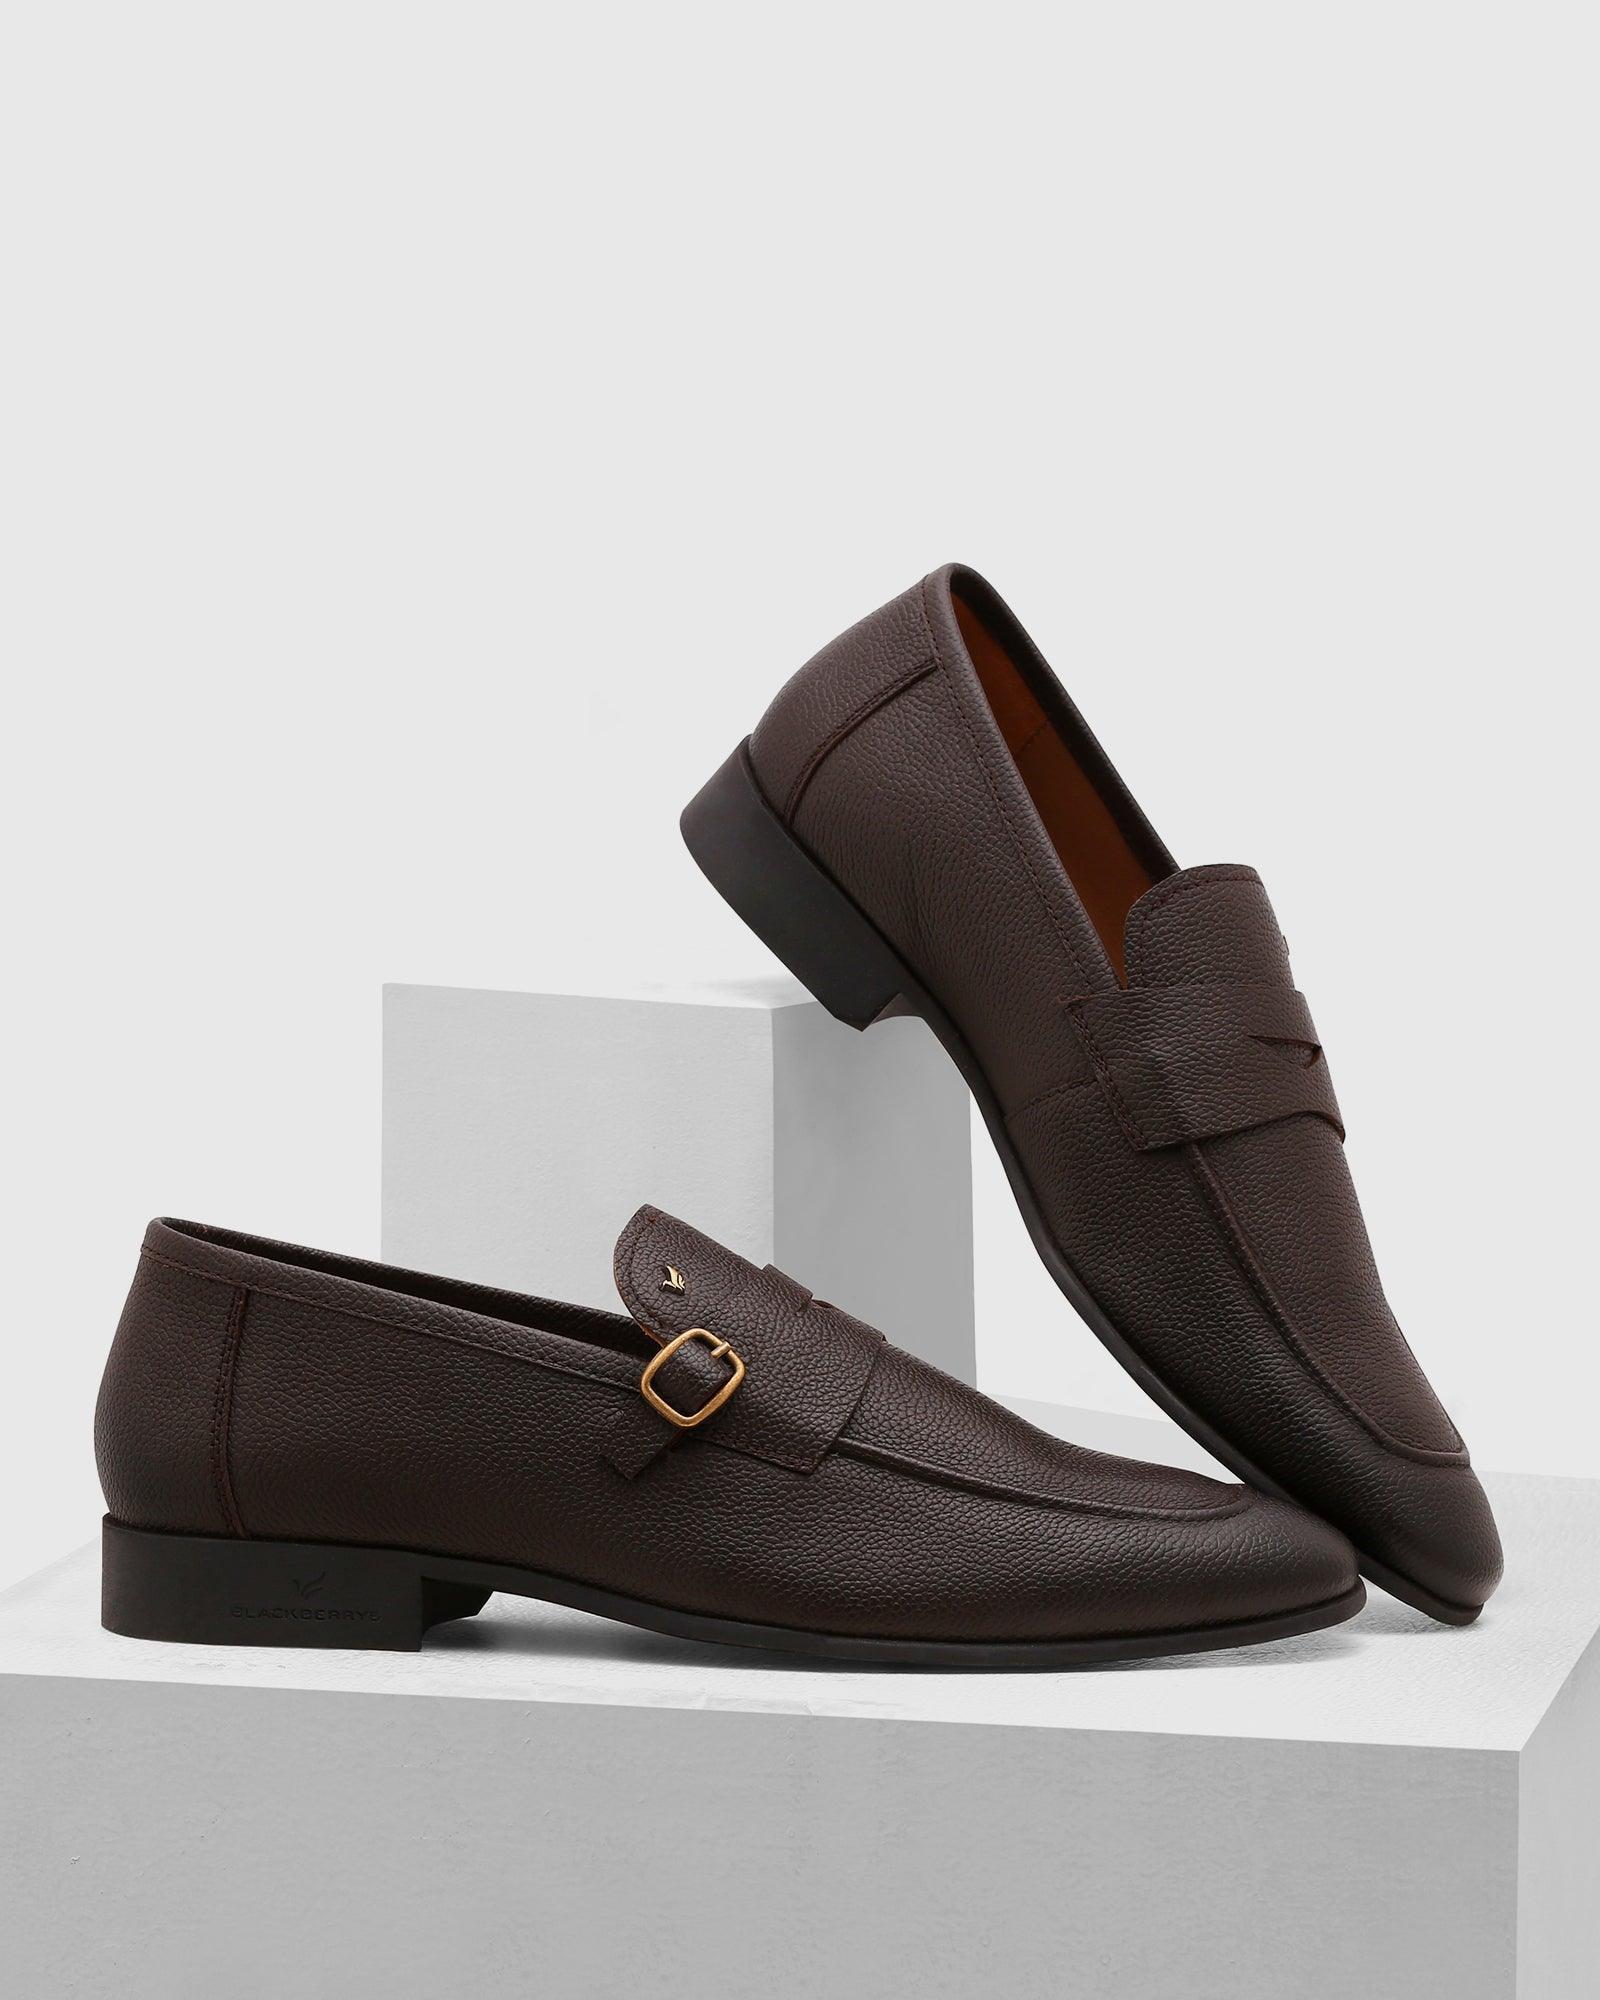 textured leather slip on shoes in brown (qatar)